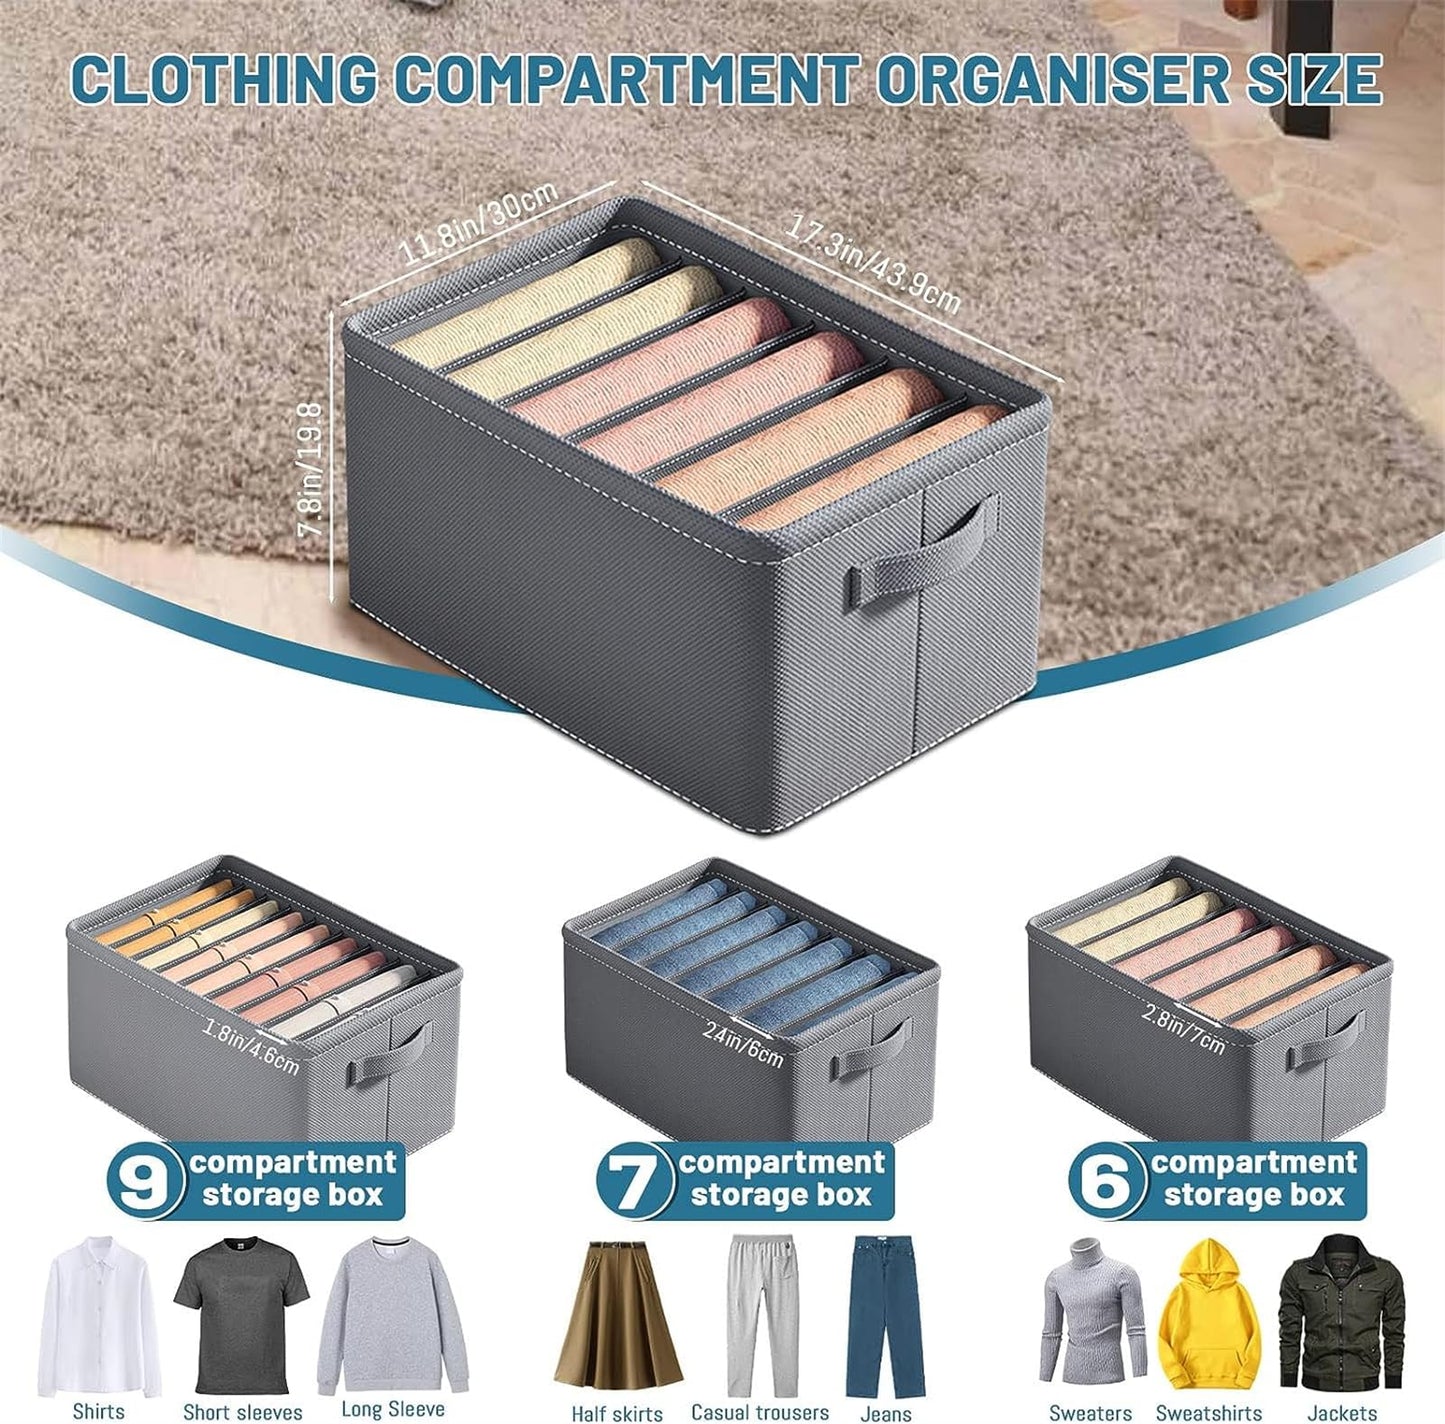 TAME Large Wardrobe Clothes Organizer, 3 Pack Closet Organizers and Storage, 21 Grids Foldable Drawer Dividers Organizers for Clothes Pants Shirts, Washable Clothing Bins Closet Storage Organizer